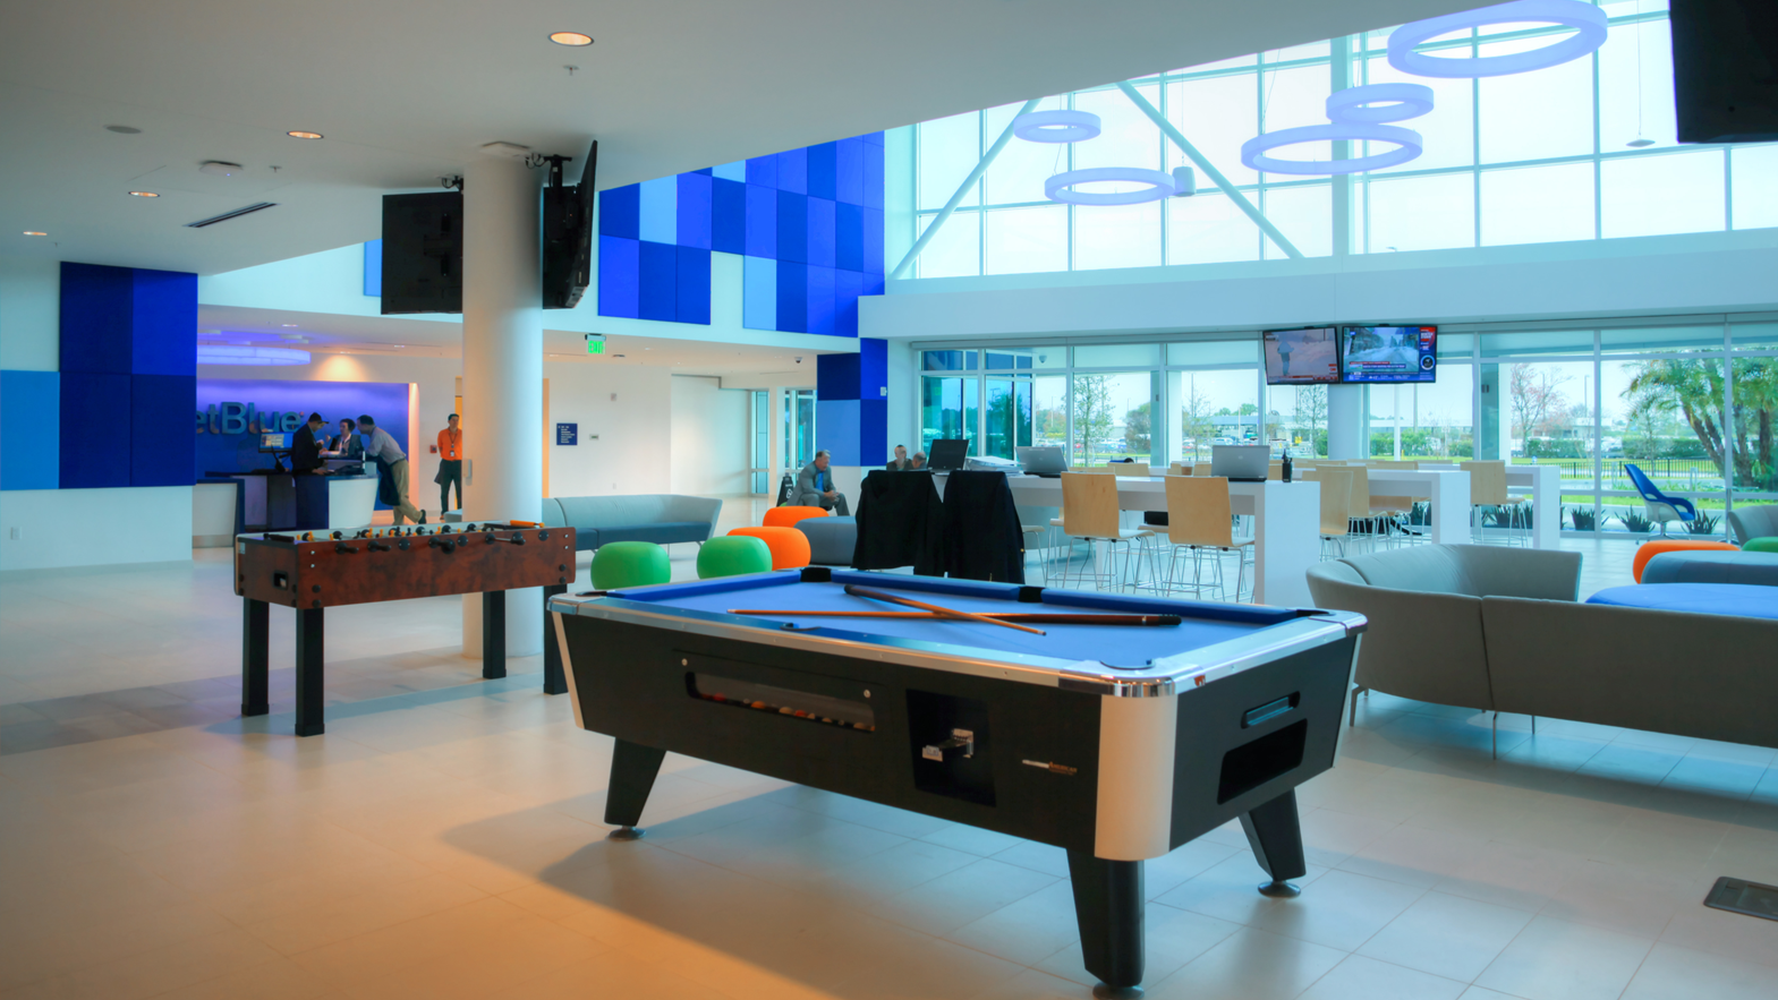 Black and blue pool table with brown table soccer game and gray sofas with tan floors